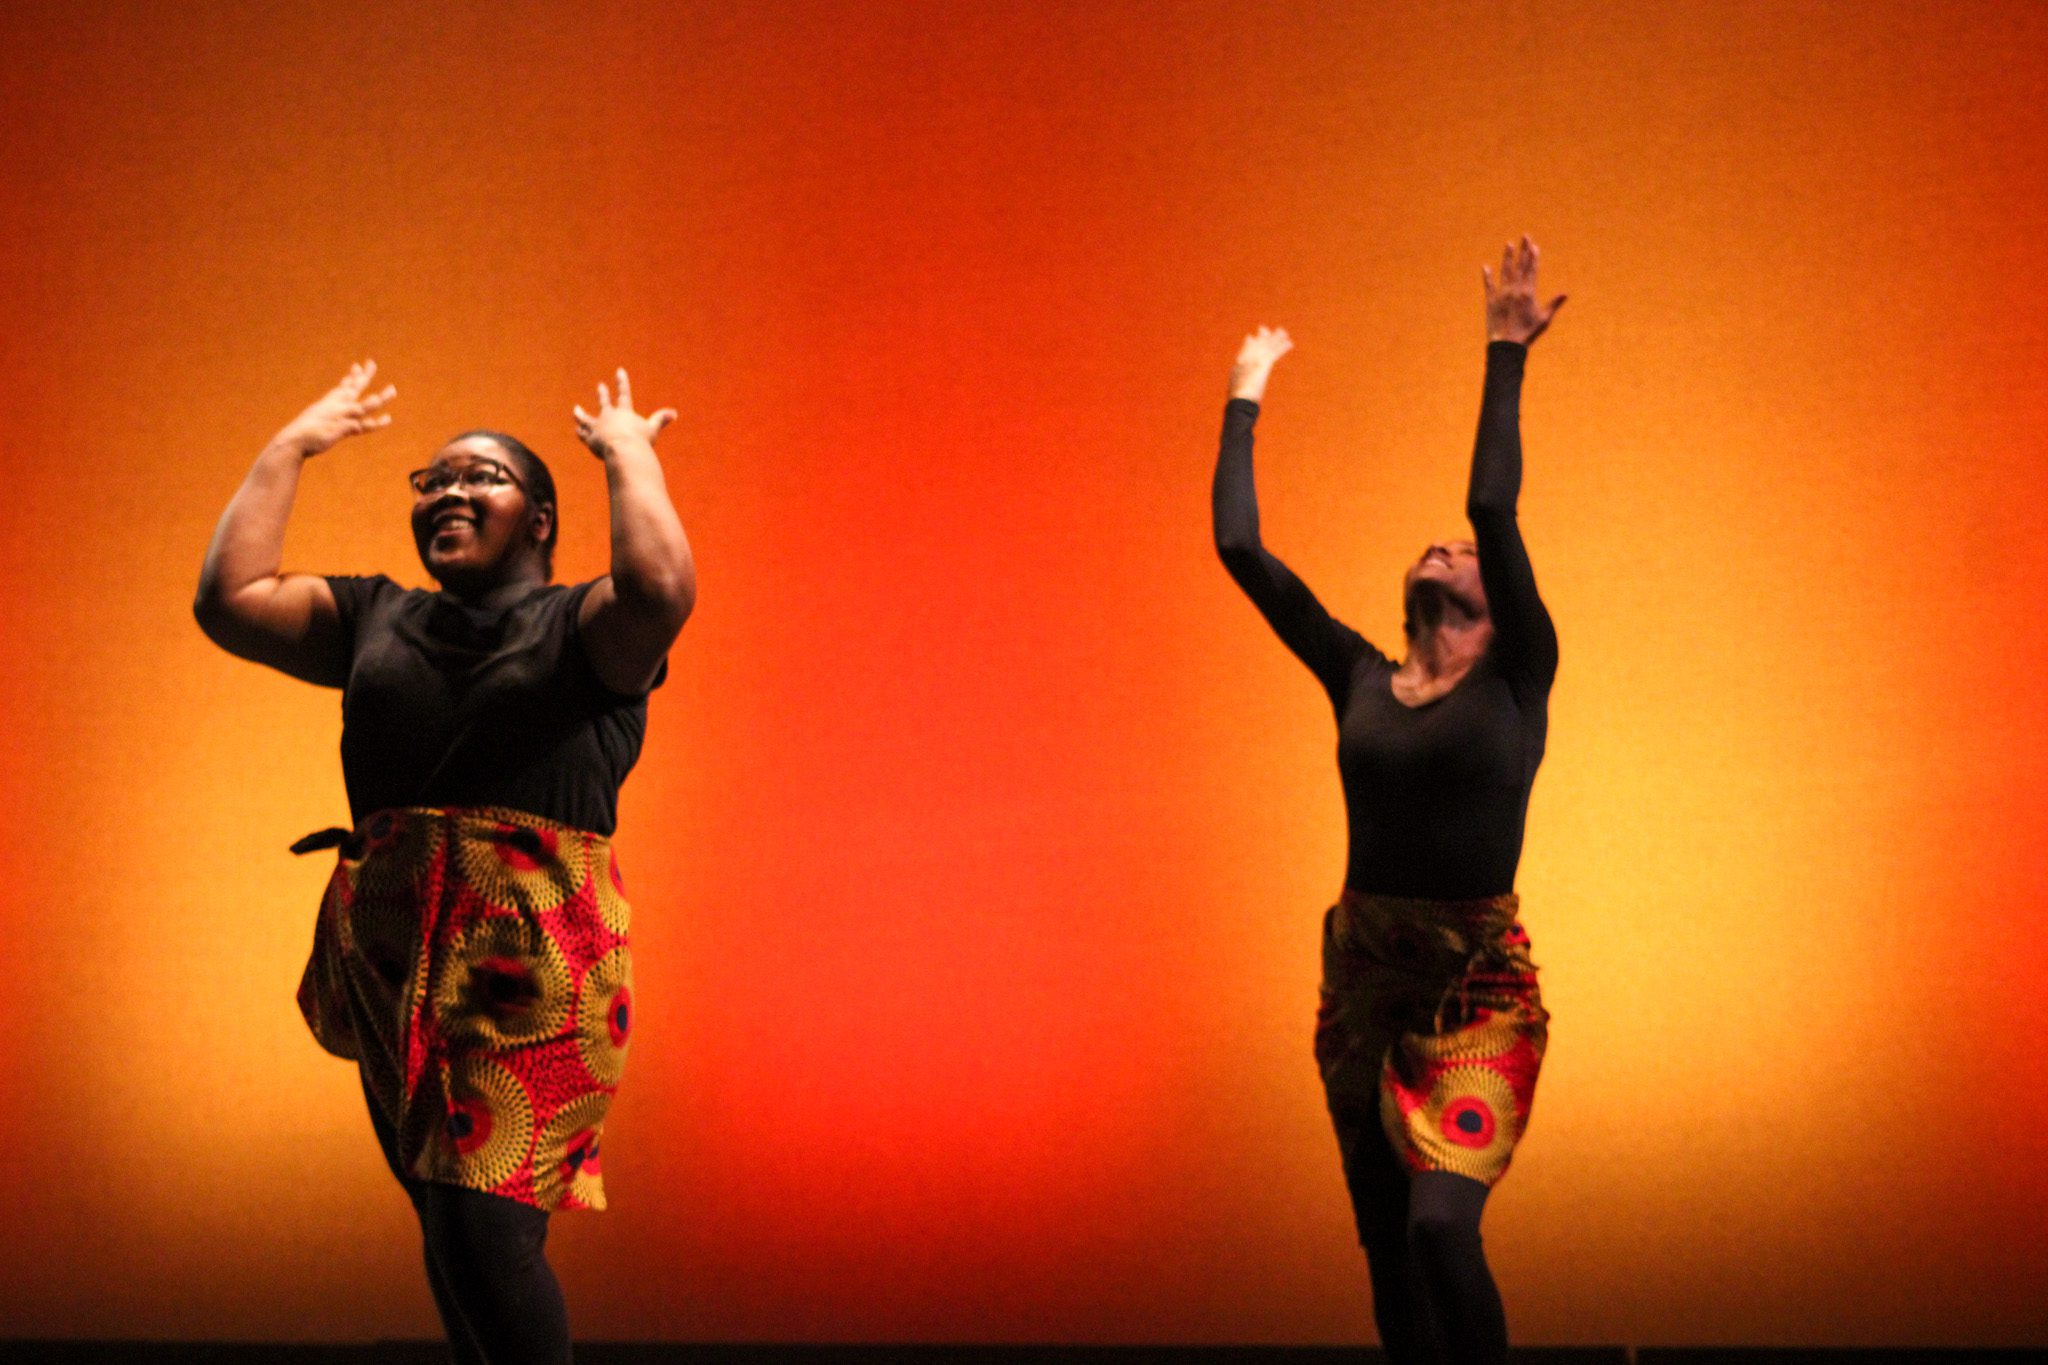 Two dancers from the Bengal Dance Collective. The dancer on the left is wearing a orange-yellow circular designed skirt with a small black t-shirt. She is smiling as her hands wave up to the sky, a part of the dance routine. The dancer on the right, wearing the same dance uniform. She has her arms up in the air and follows the dance routine. The background displays an yellow colored aura surrounding the two dancers. The other color transitioned into an orange color.